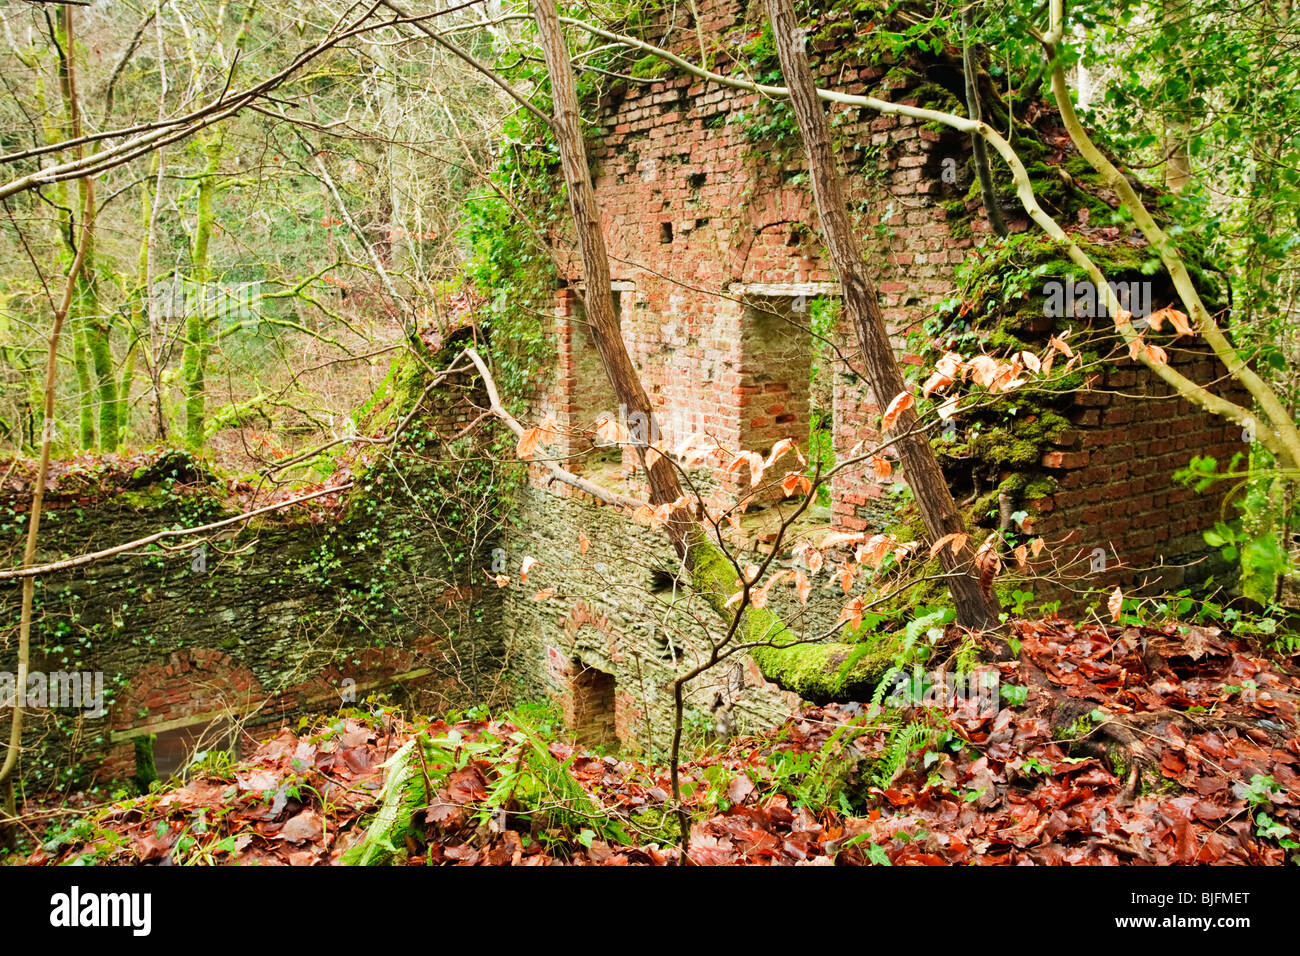 Ruined mill building in the Roe Valley Country Park near Limavady, County Derry, Northern Ireland Stock Photo